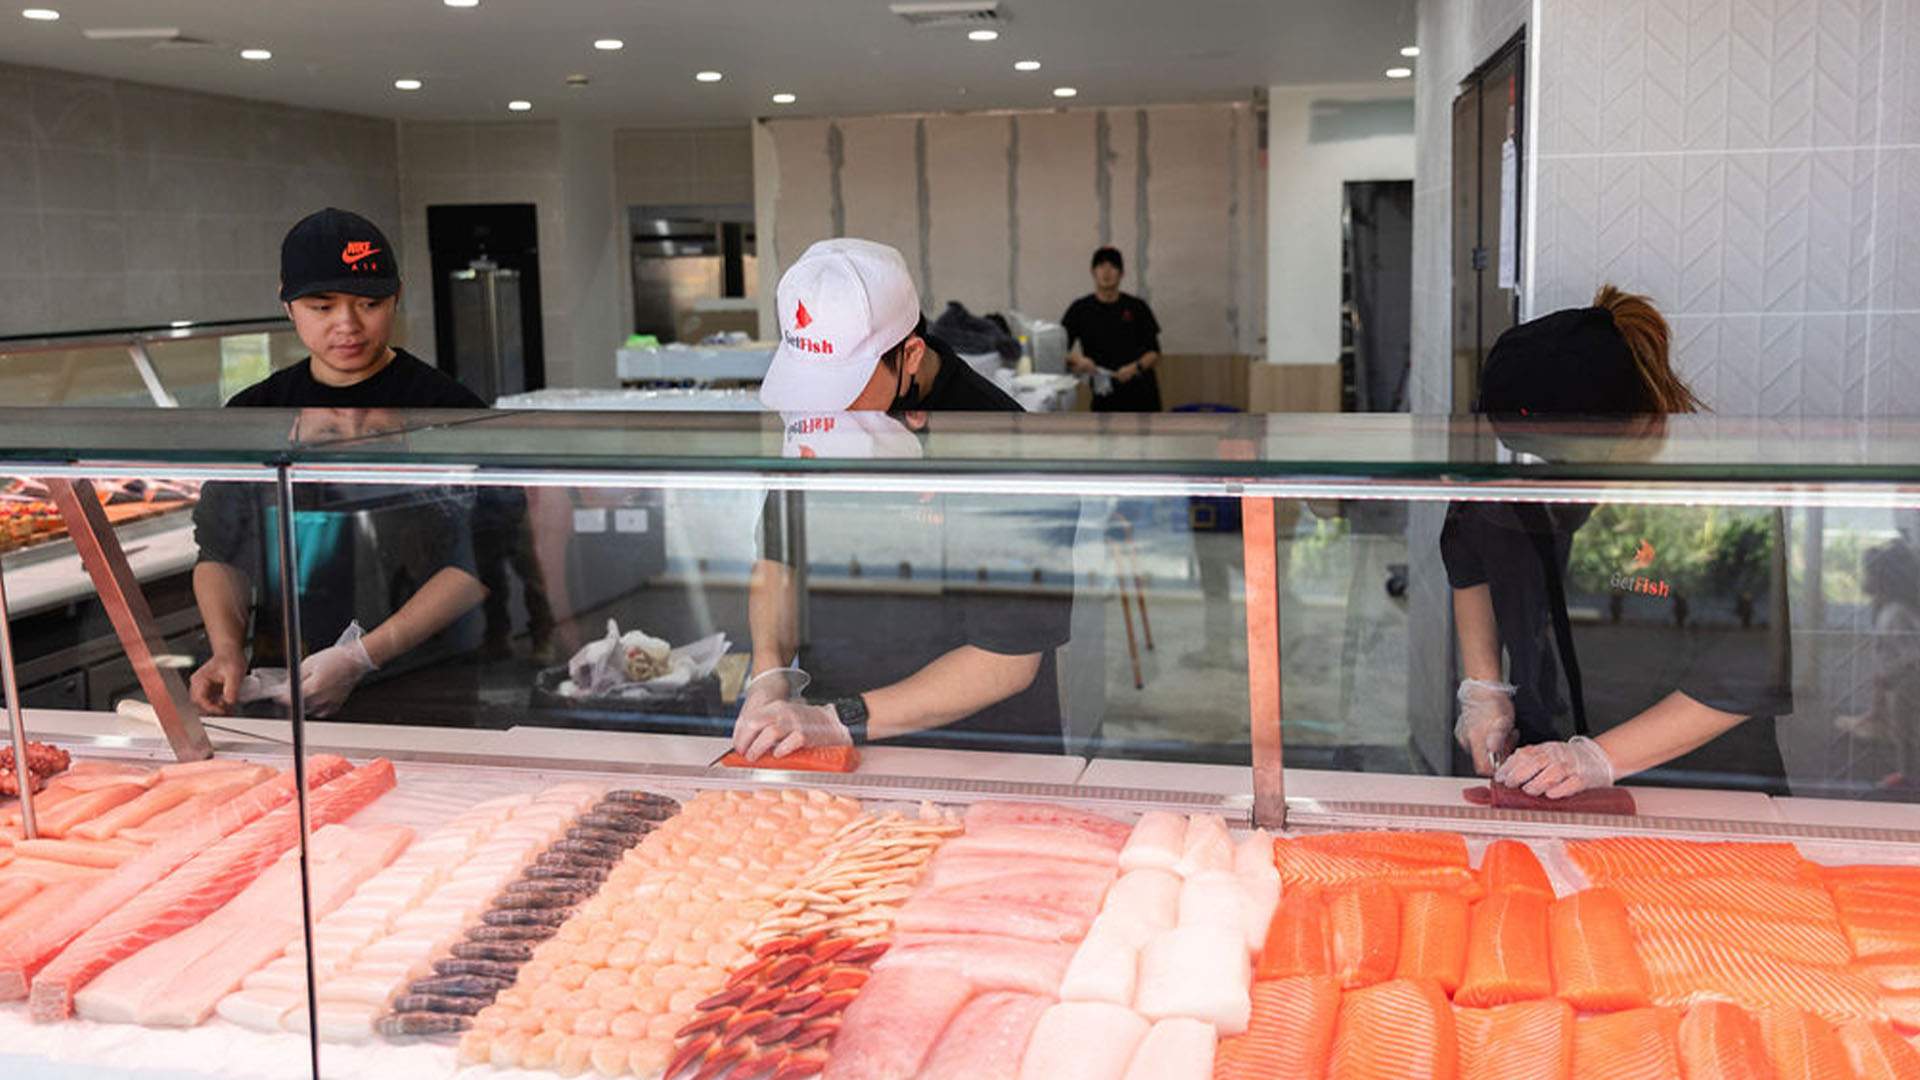 GetSashimi Is Bondi's New One-Stop Shop for Top-Quality Seafood